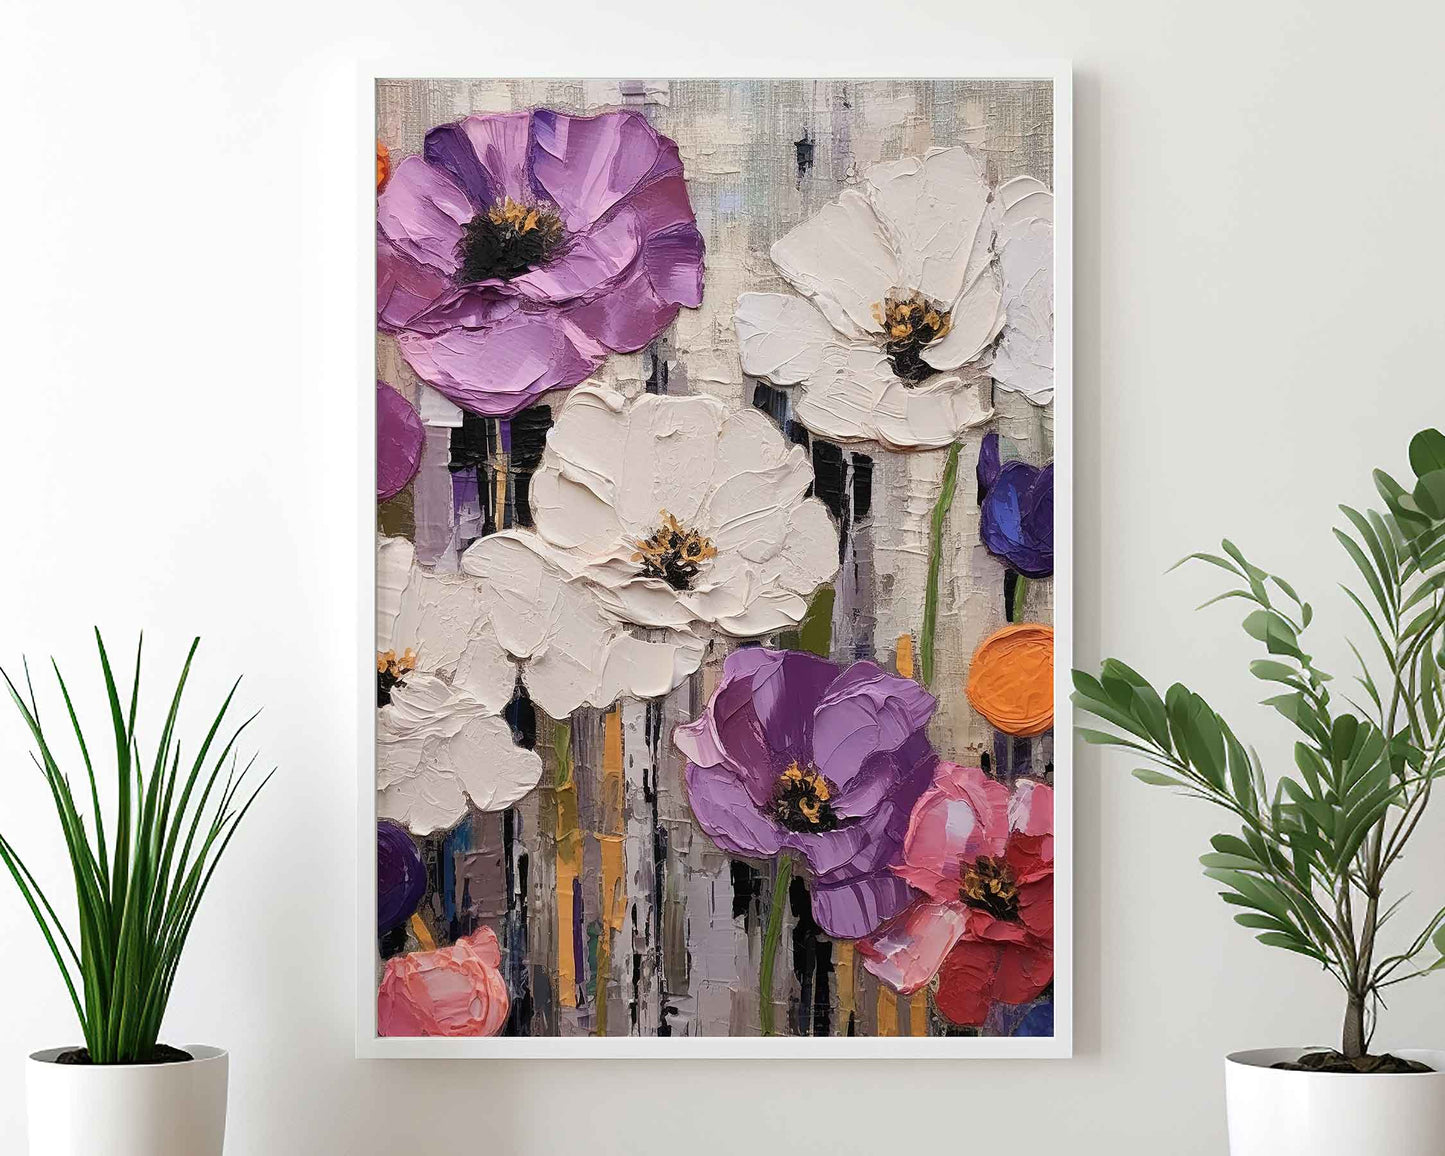 Framed Image of Colourful Flowers Oil Painting Wall Art Prints Thick Impasto Palette